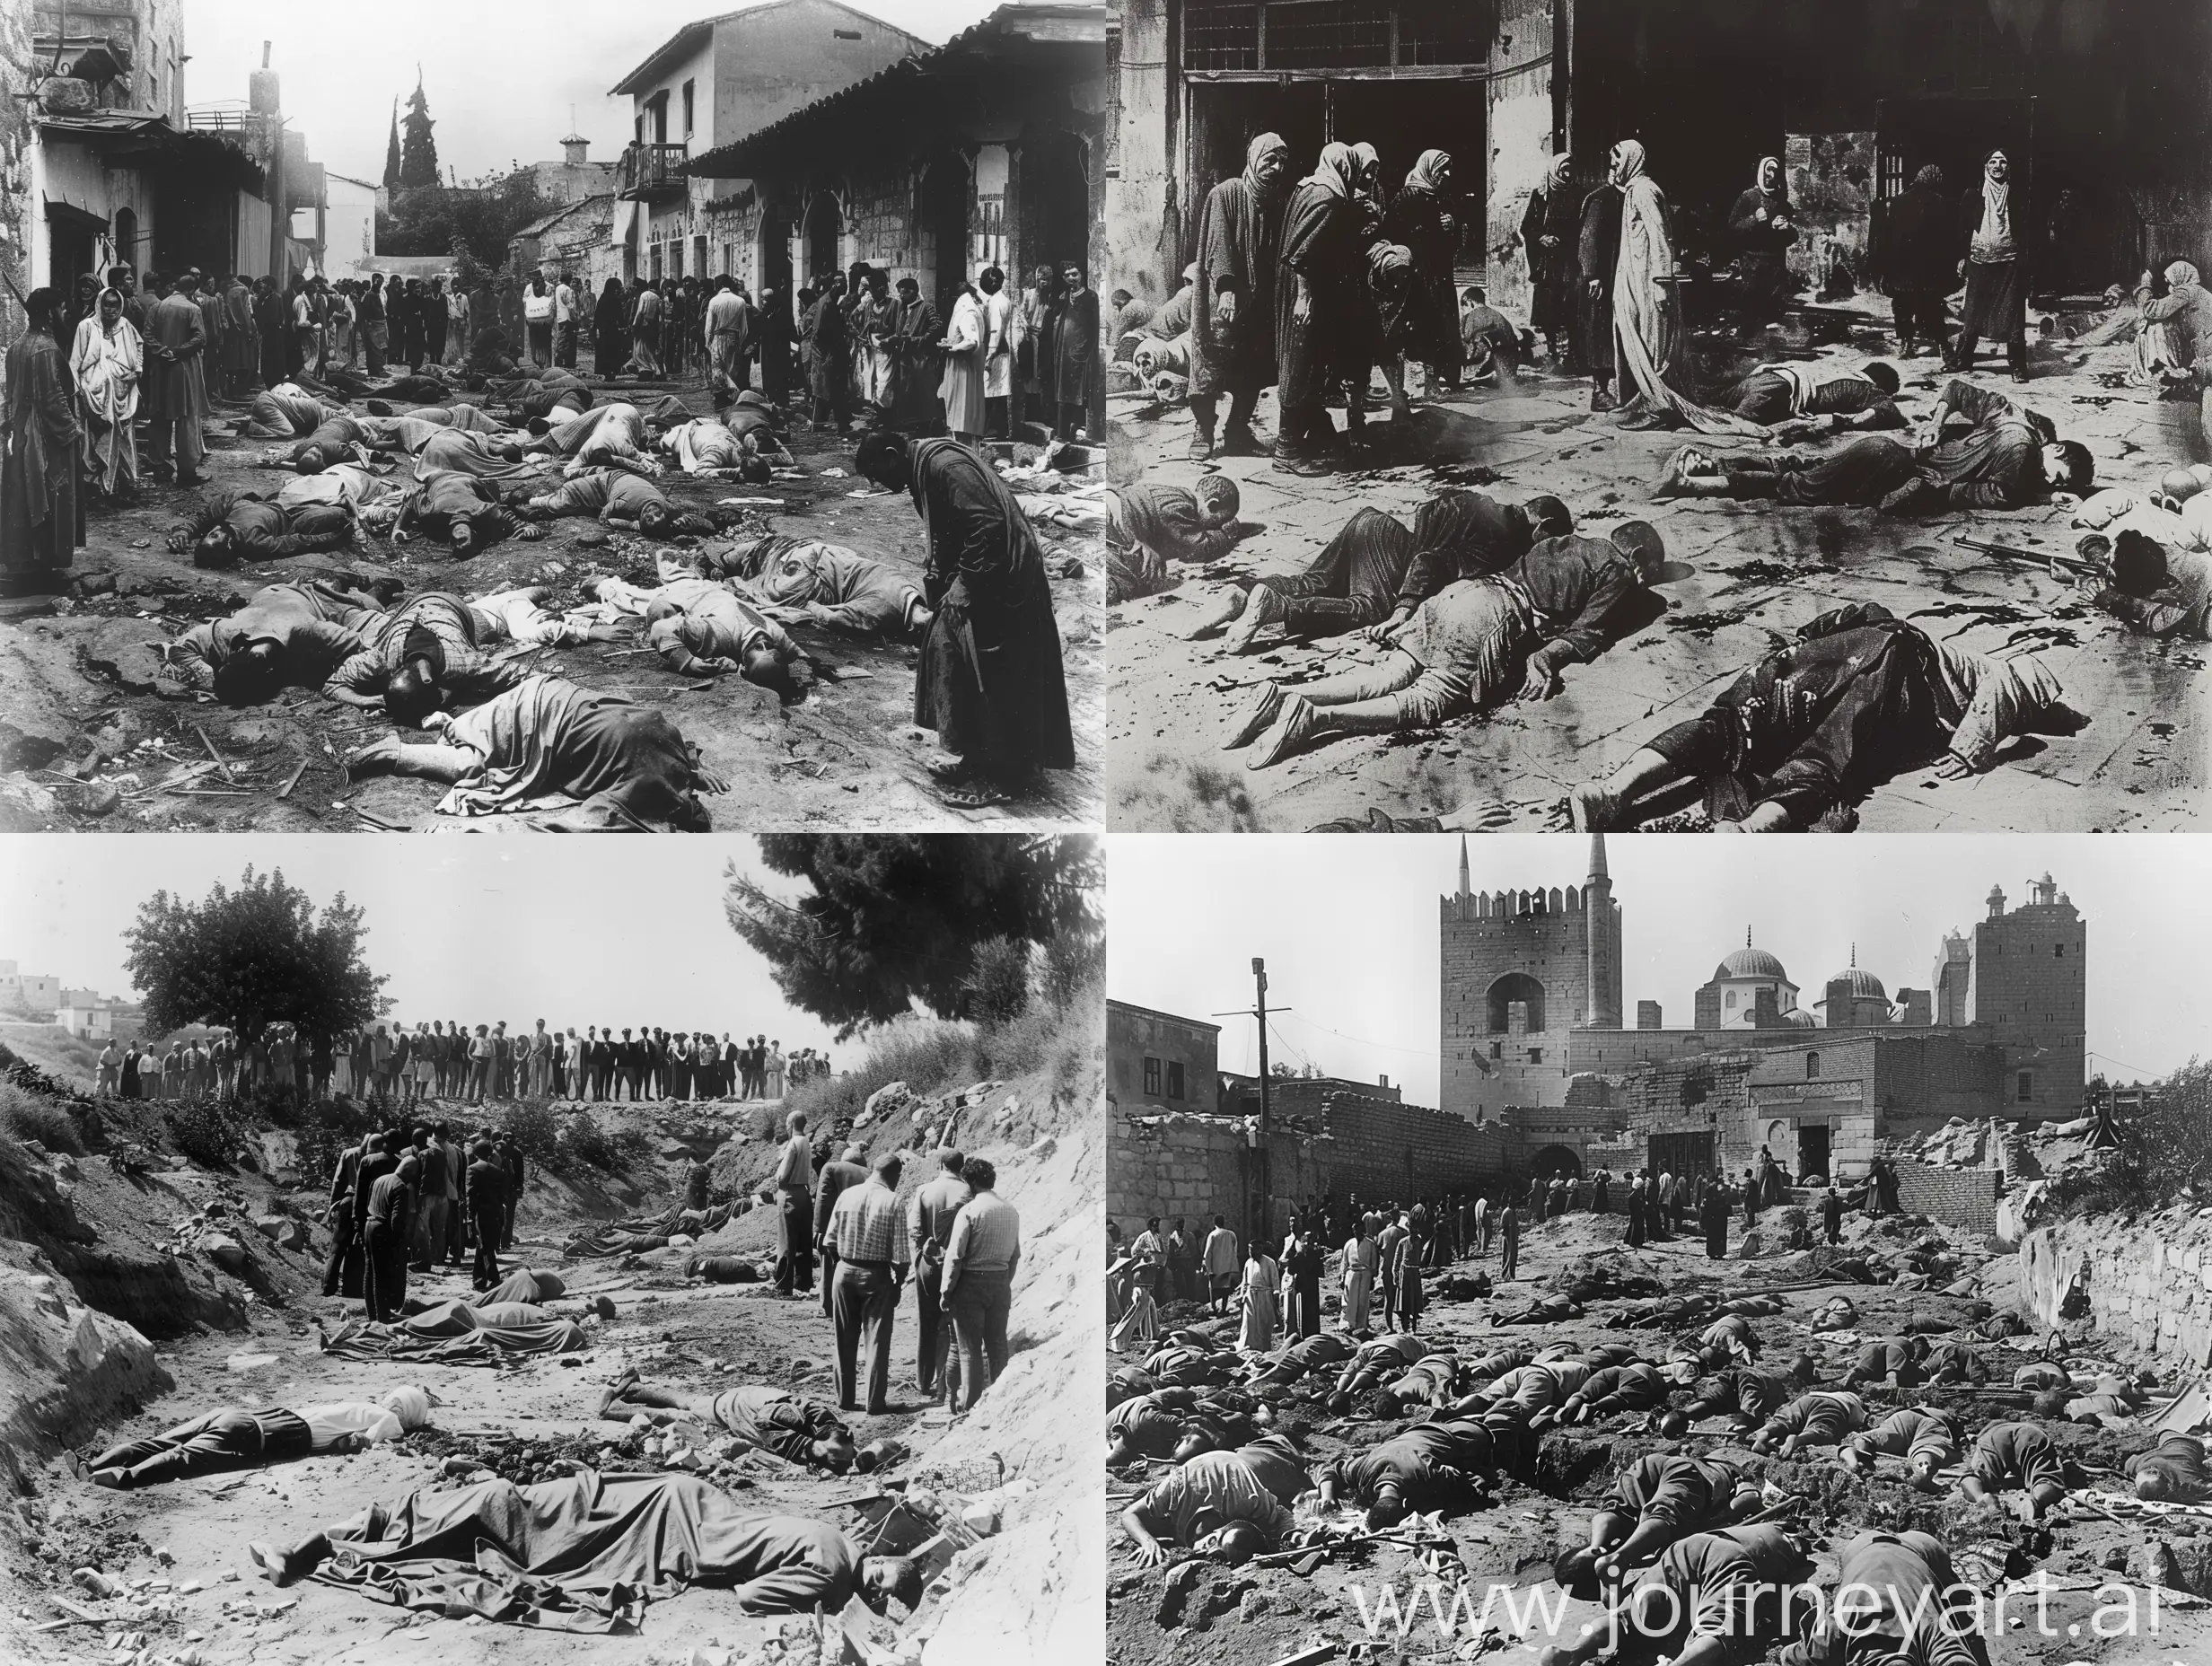 The fact that Toynbee largely ignores the conclusions of the commission calls into question his interpretation of events and his objectivity. Toynbee's figure of some 300 Turks killed, while certainly important, does not fully reflect the scale of the wider human rights violations outlined in the commission's report. The Commission's findings show that the Izmit massacres were a far greater tragedy, with many innocent people killed, seriously injured and driven from their homes.